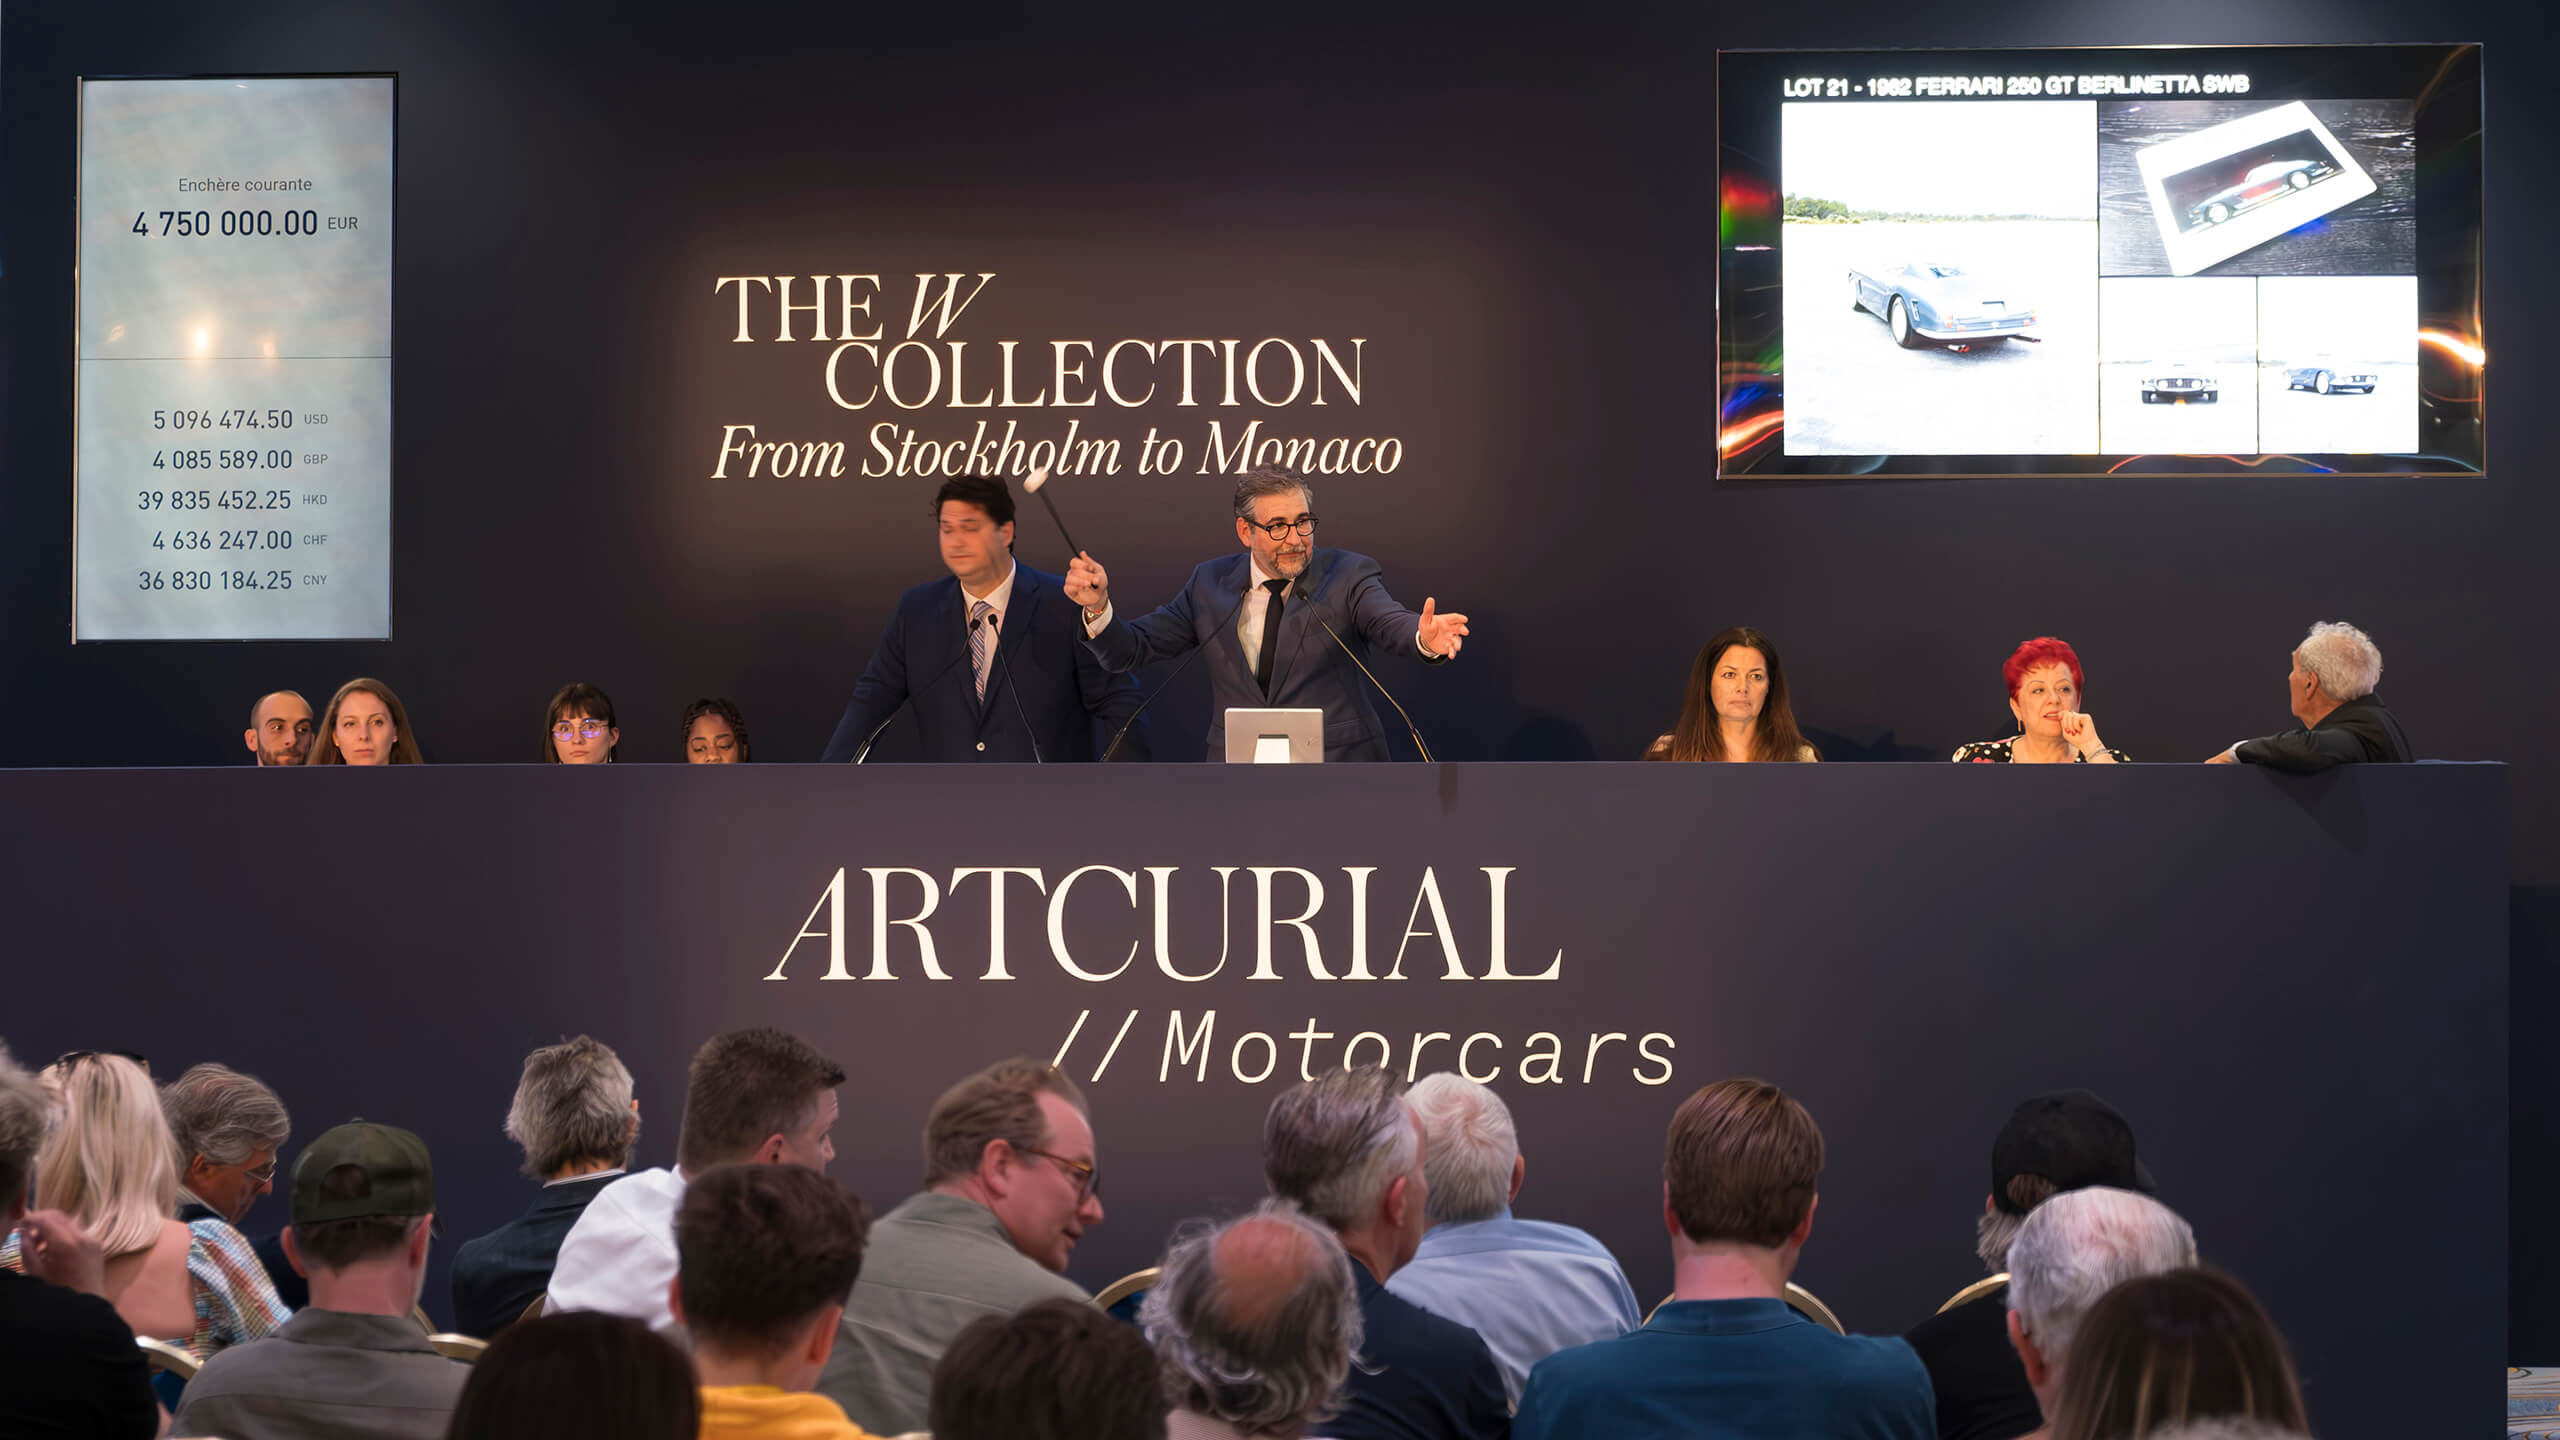 The flag drops in Monaco: Artcurial at the Fairmont